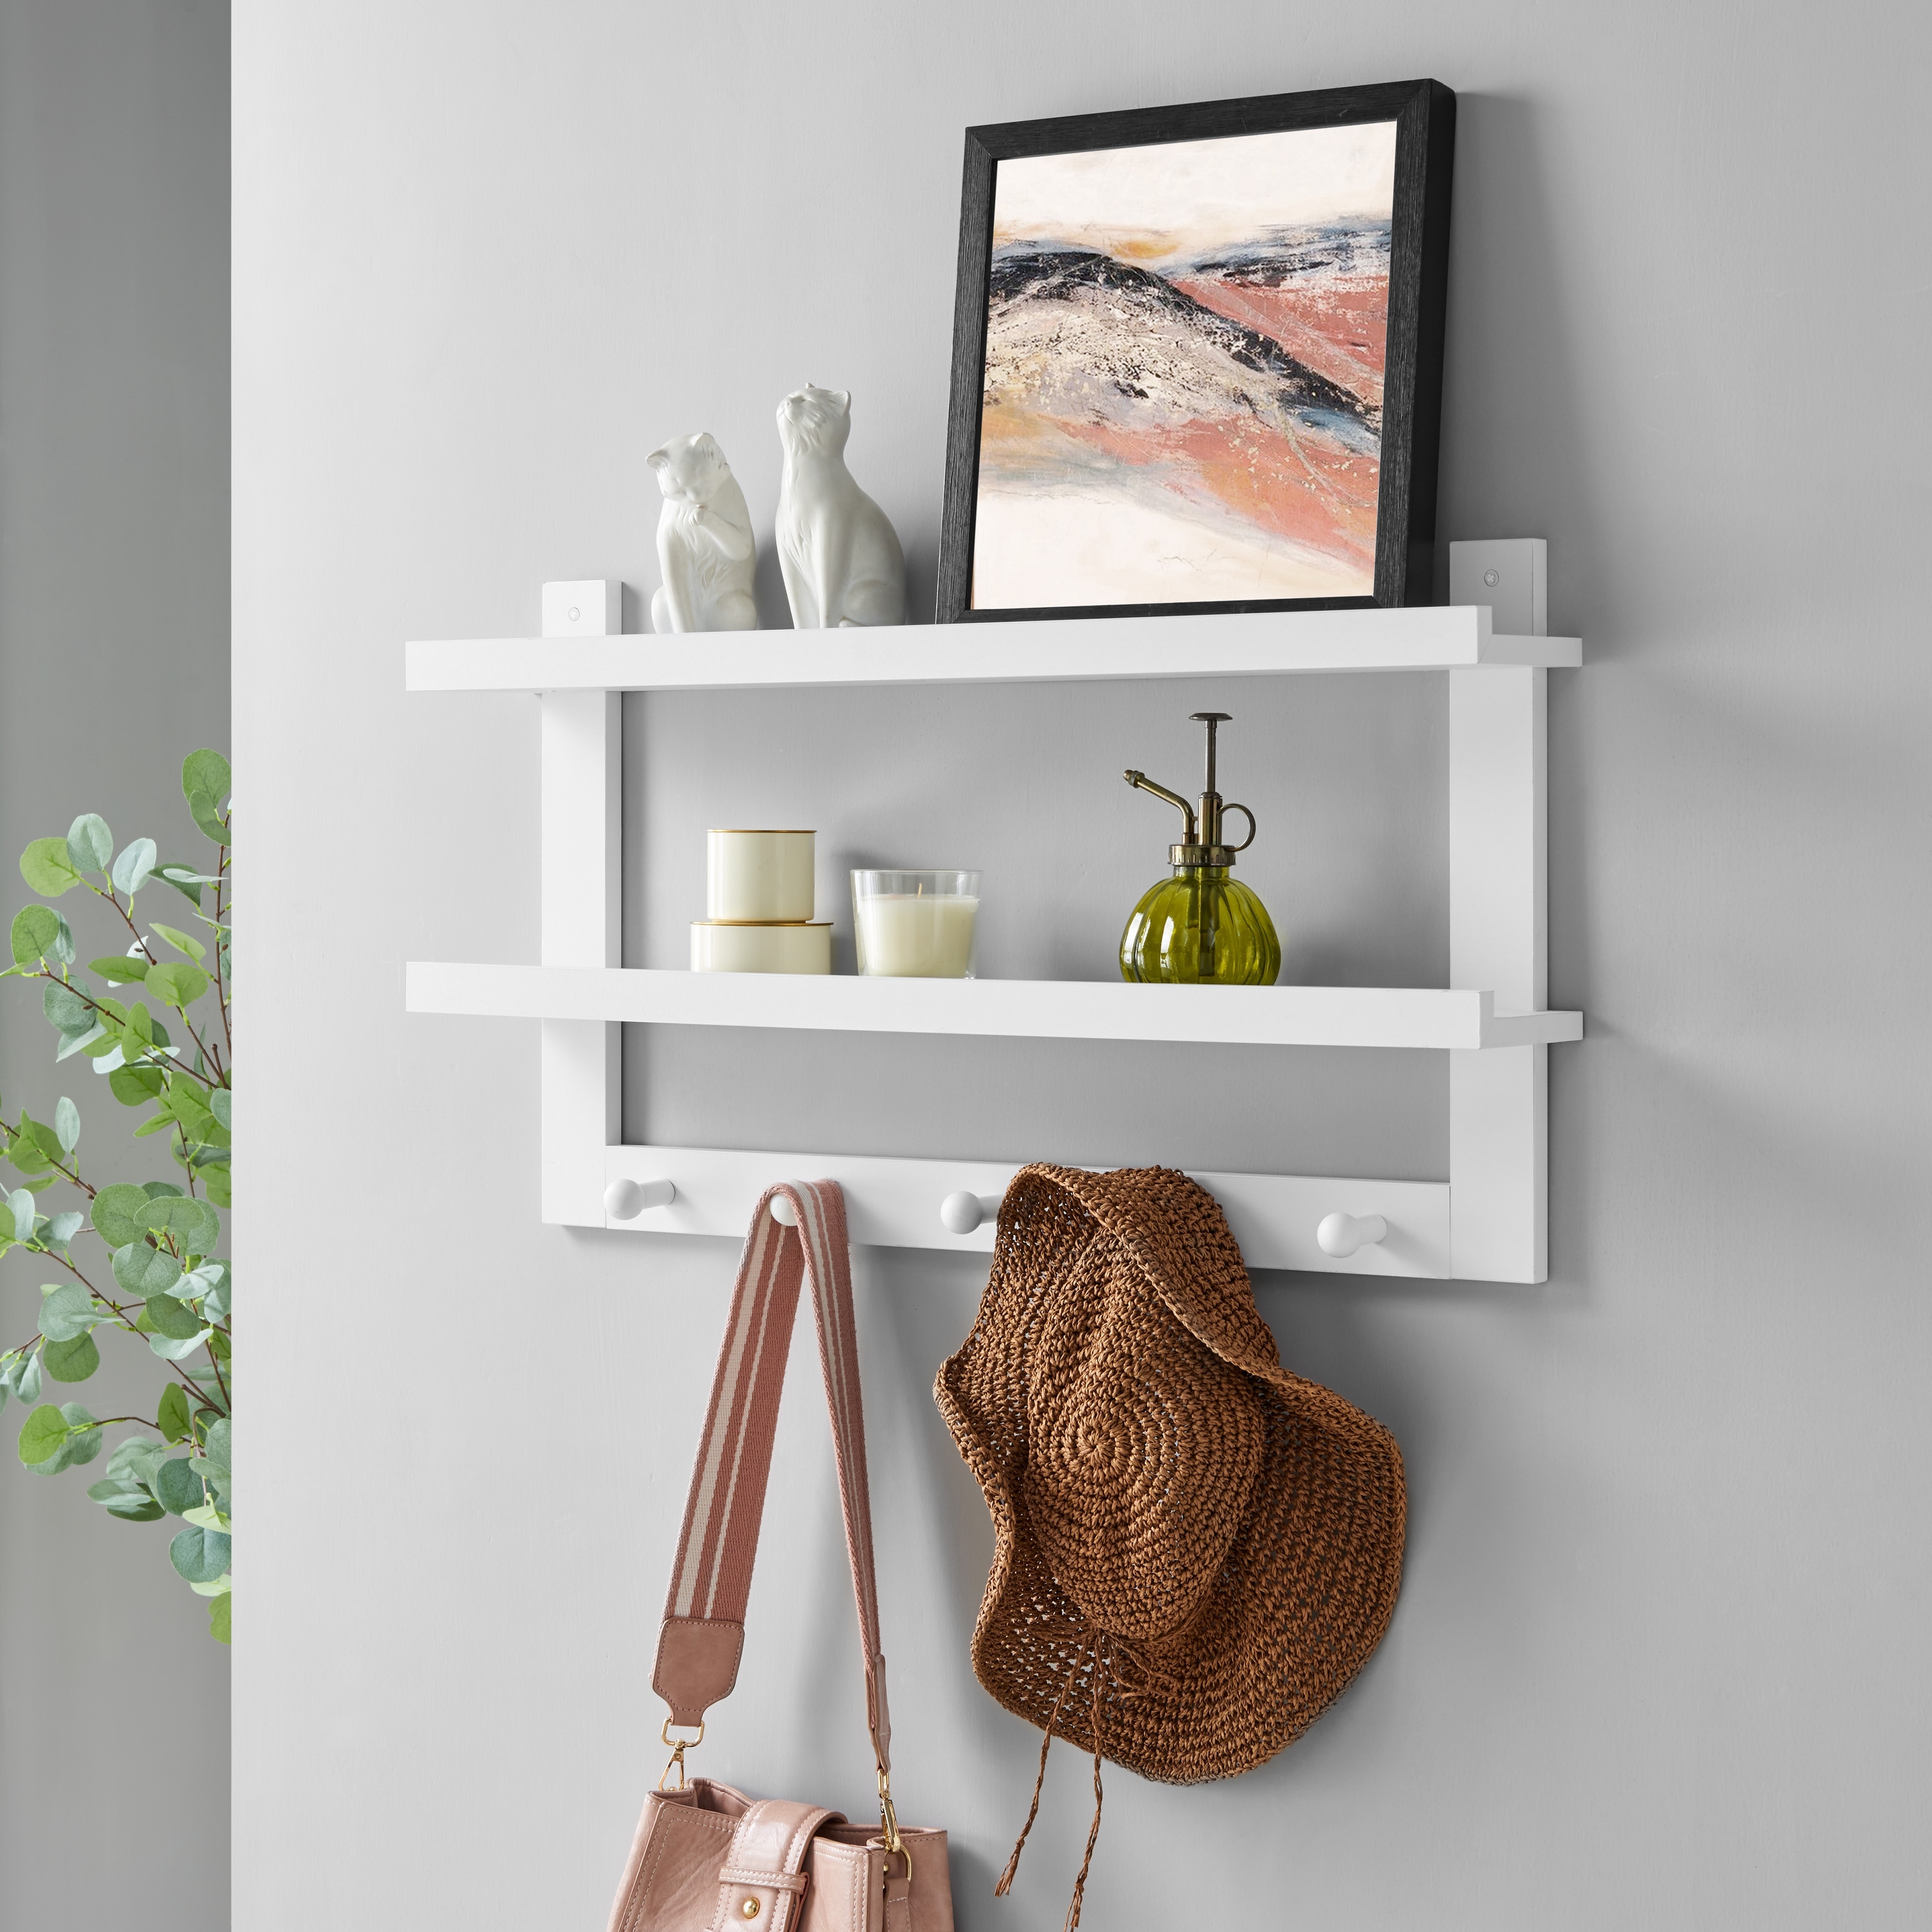 https://ak1.ostkcdn.com/images/products/is/images/direct/51fa2e13b6ec415ee9d9d1d66d9545f64c7368e9/Danya-B.-Two-Tier-Ledge-Shelf-Wall-Organizer-with-Five-Hanging-Hooks---Entryway-or-Bathroom.jpg